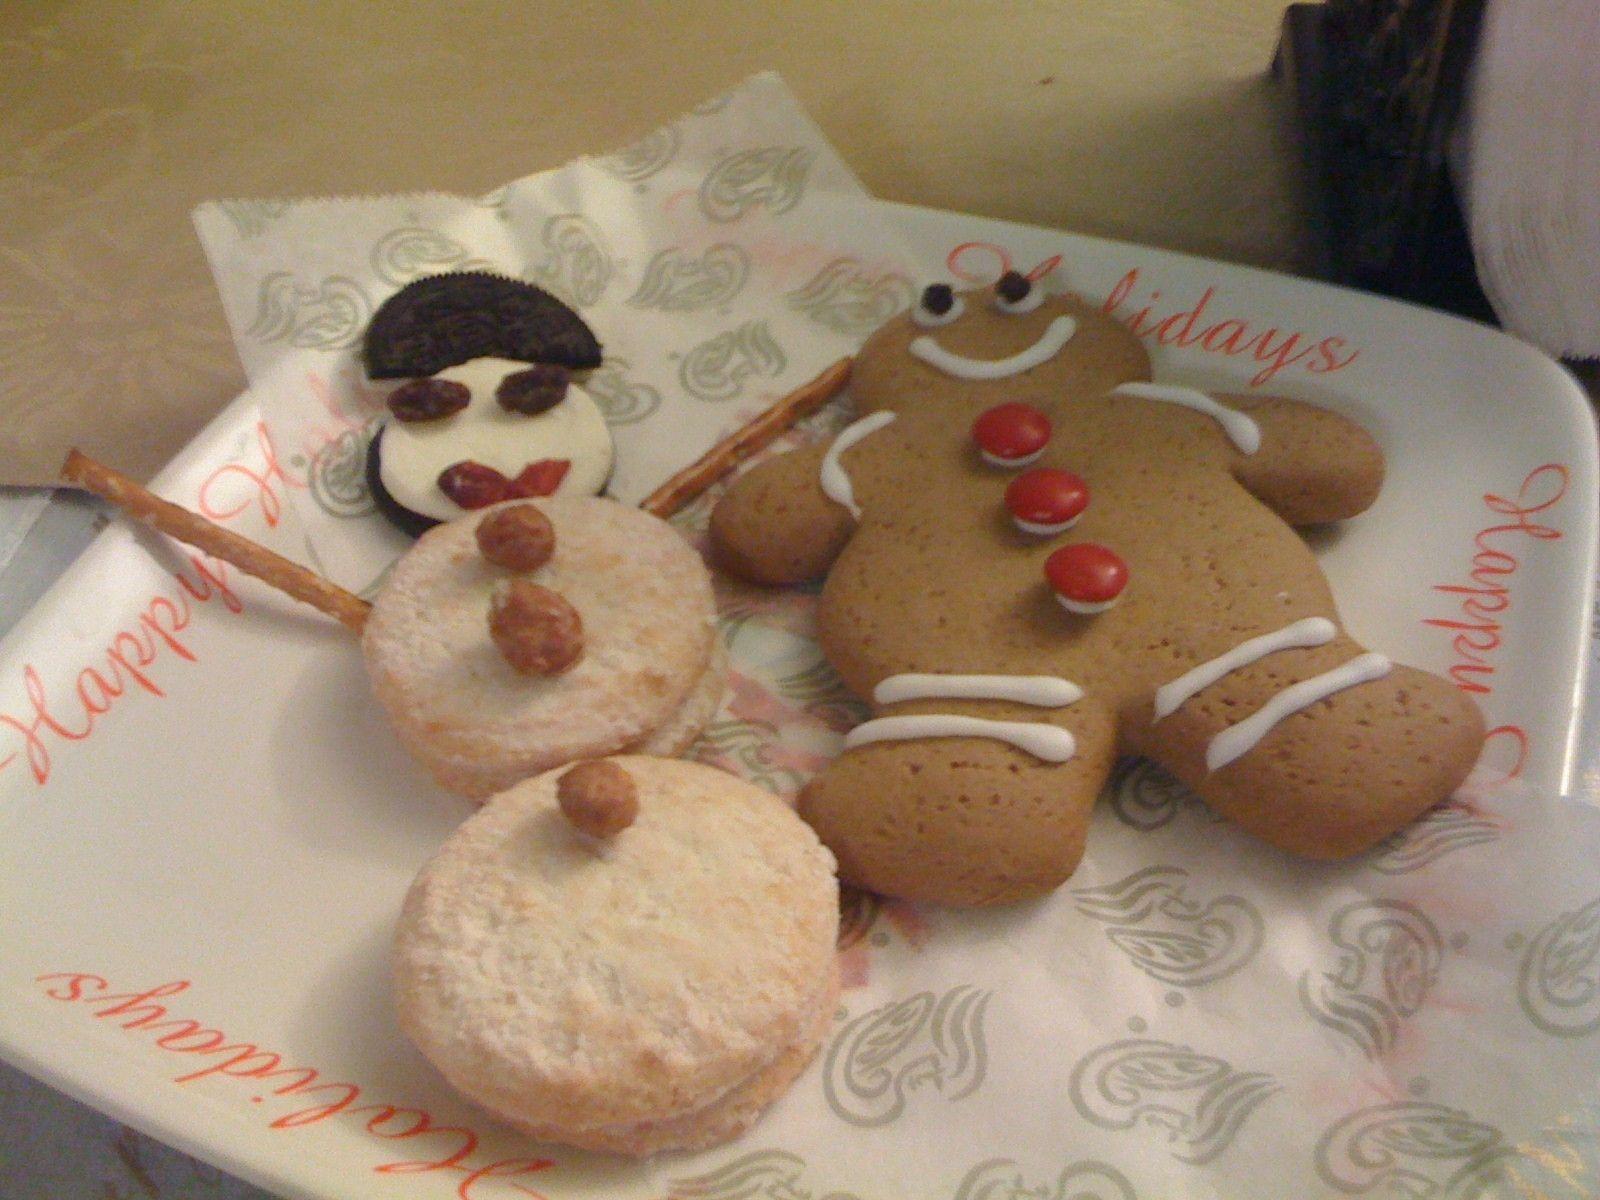 Gingerbread man and snow man